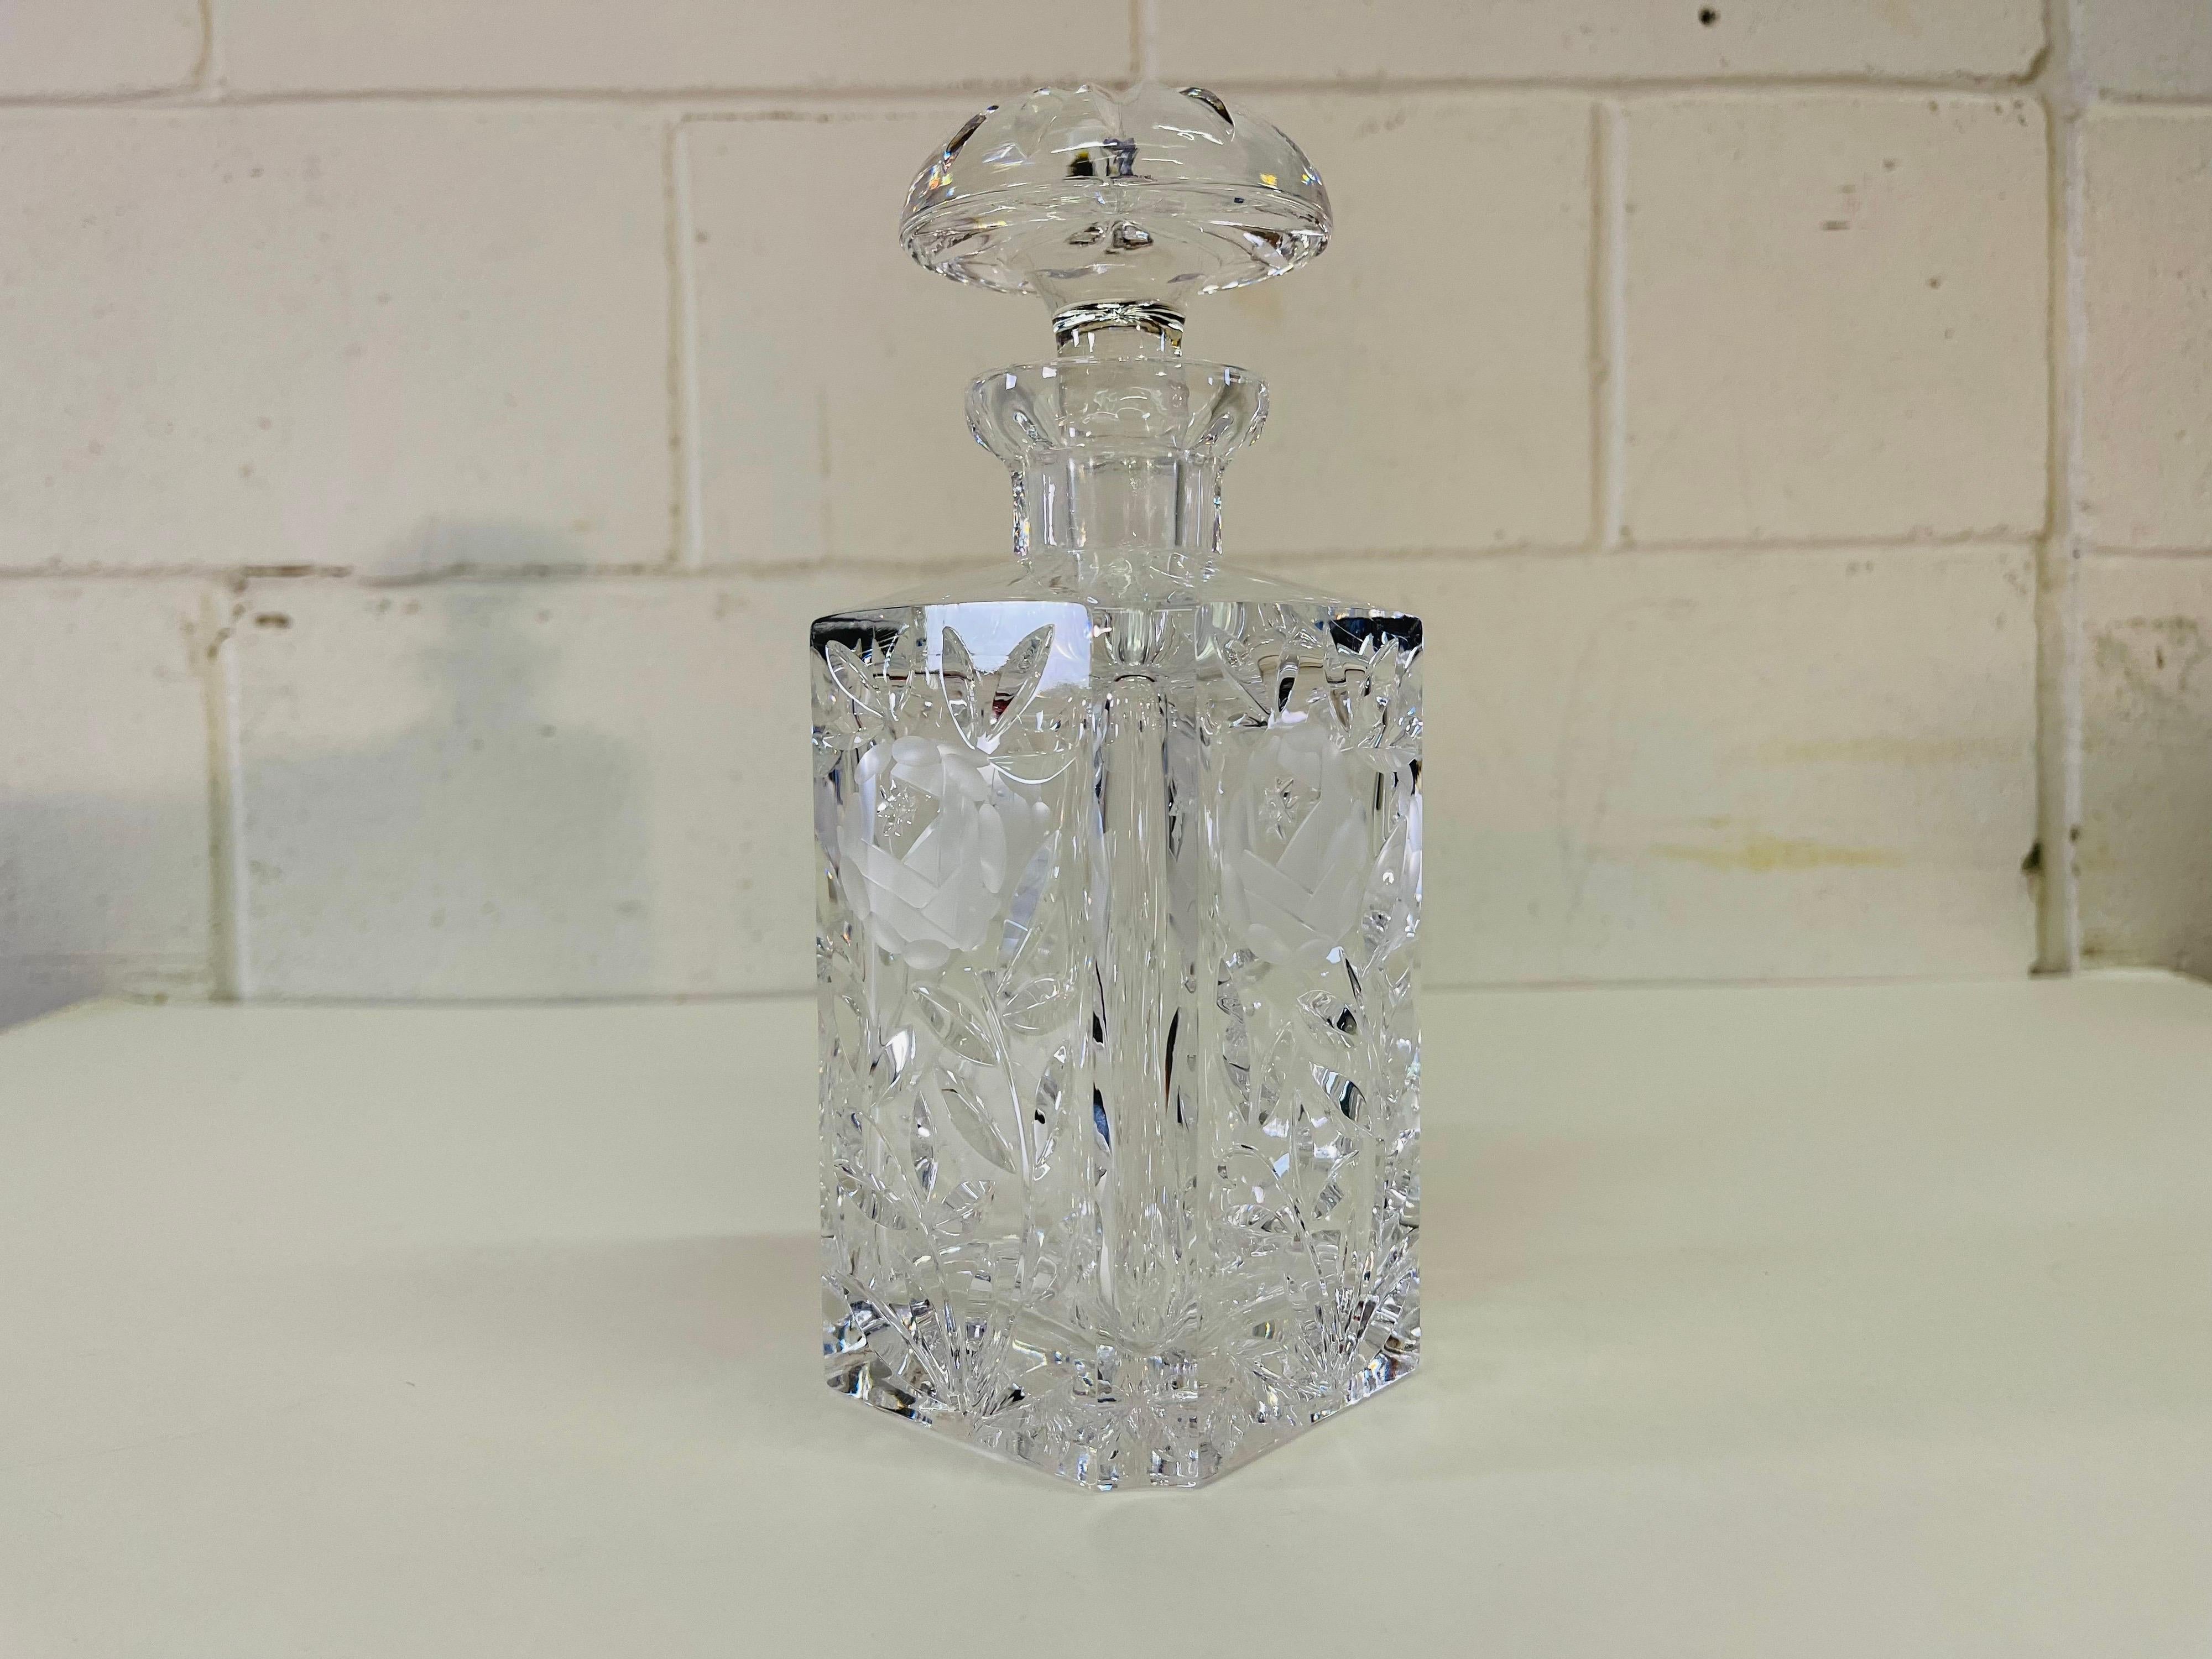 Vintage 1950s square glass decanter with a rose pattern. The decanter is a heavy crystal and is well designed glass. No marks.